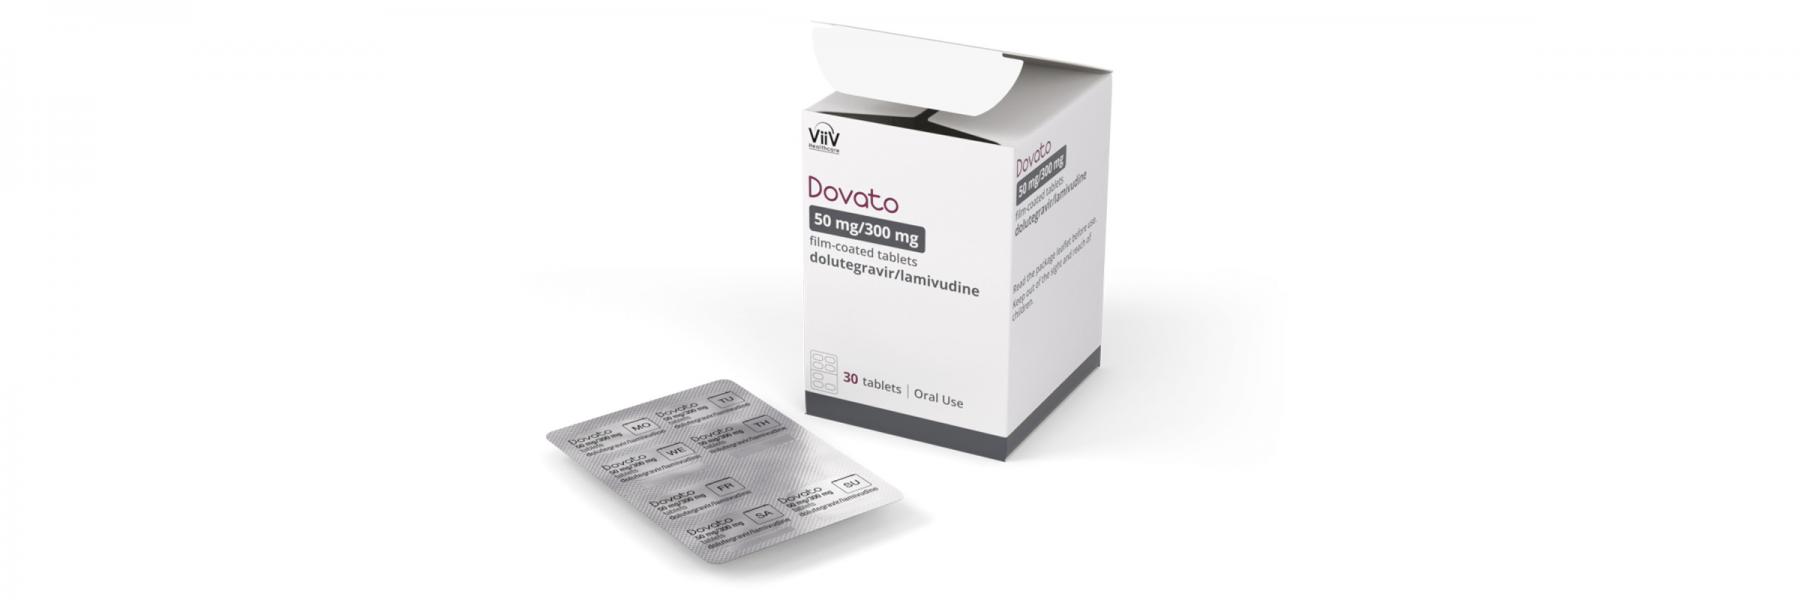 image of Dovato's new blister pack package and box